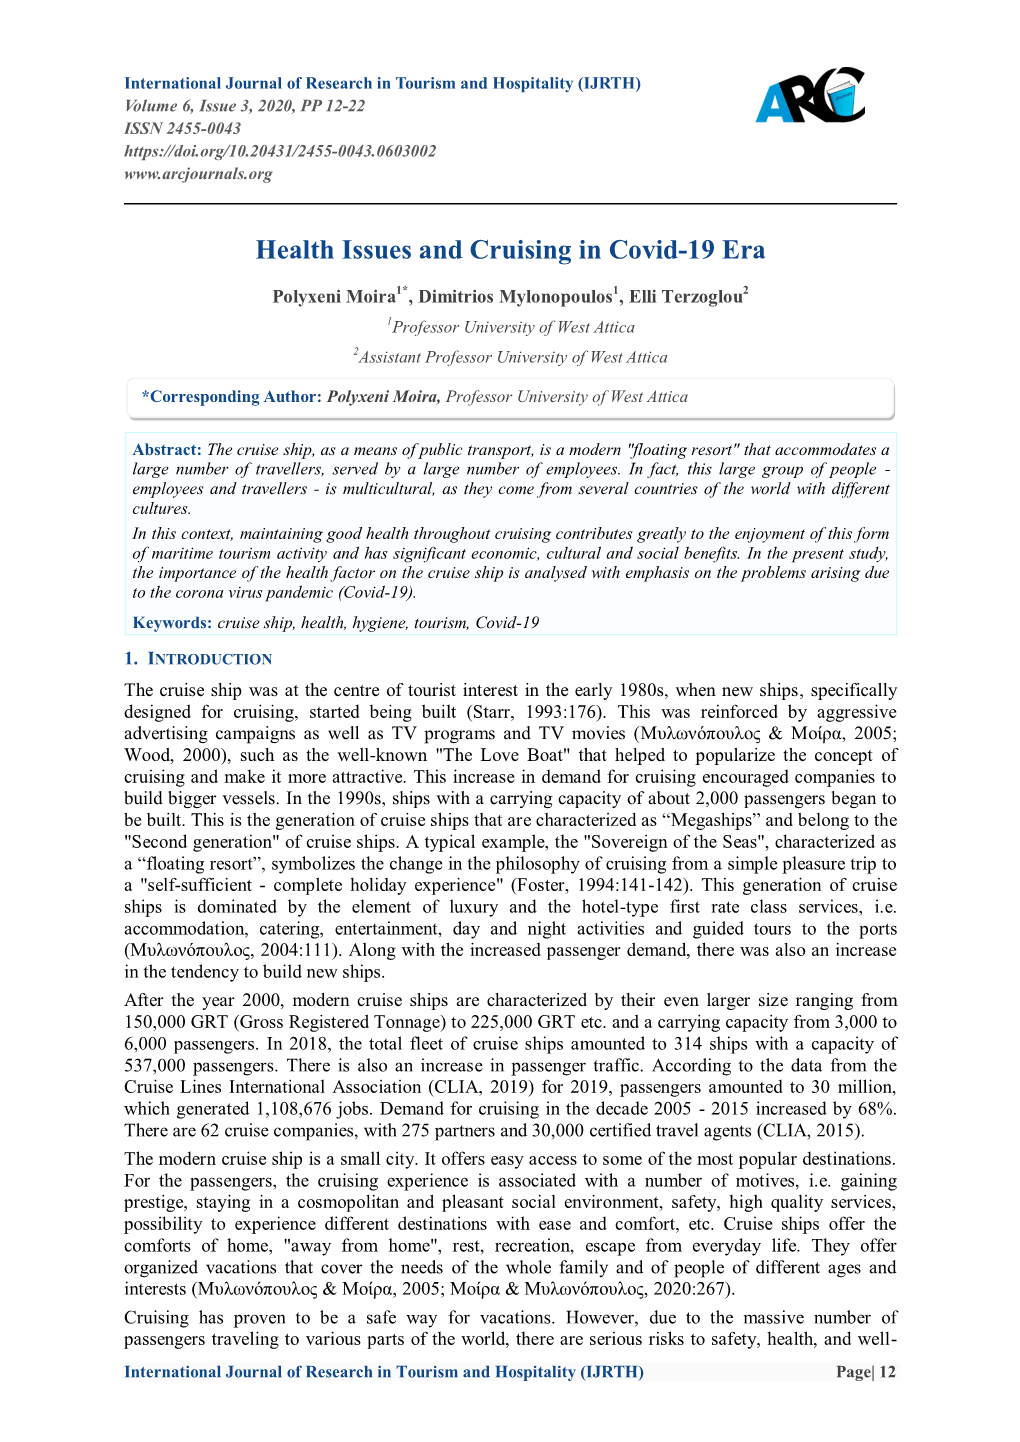 Health Issues and Cruising in Covid-19 Era